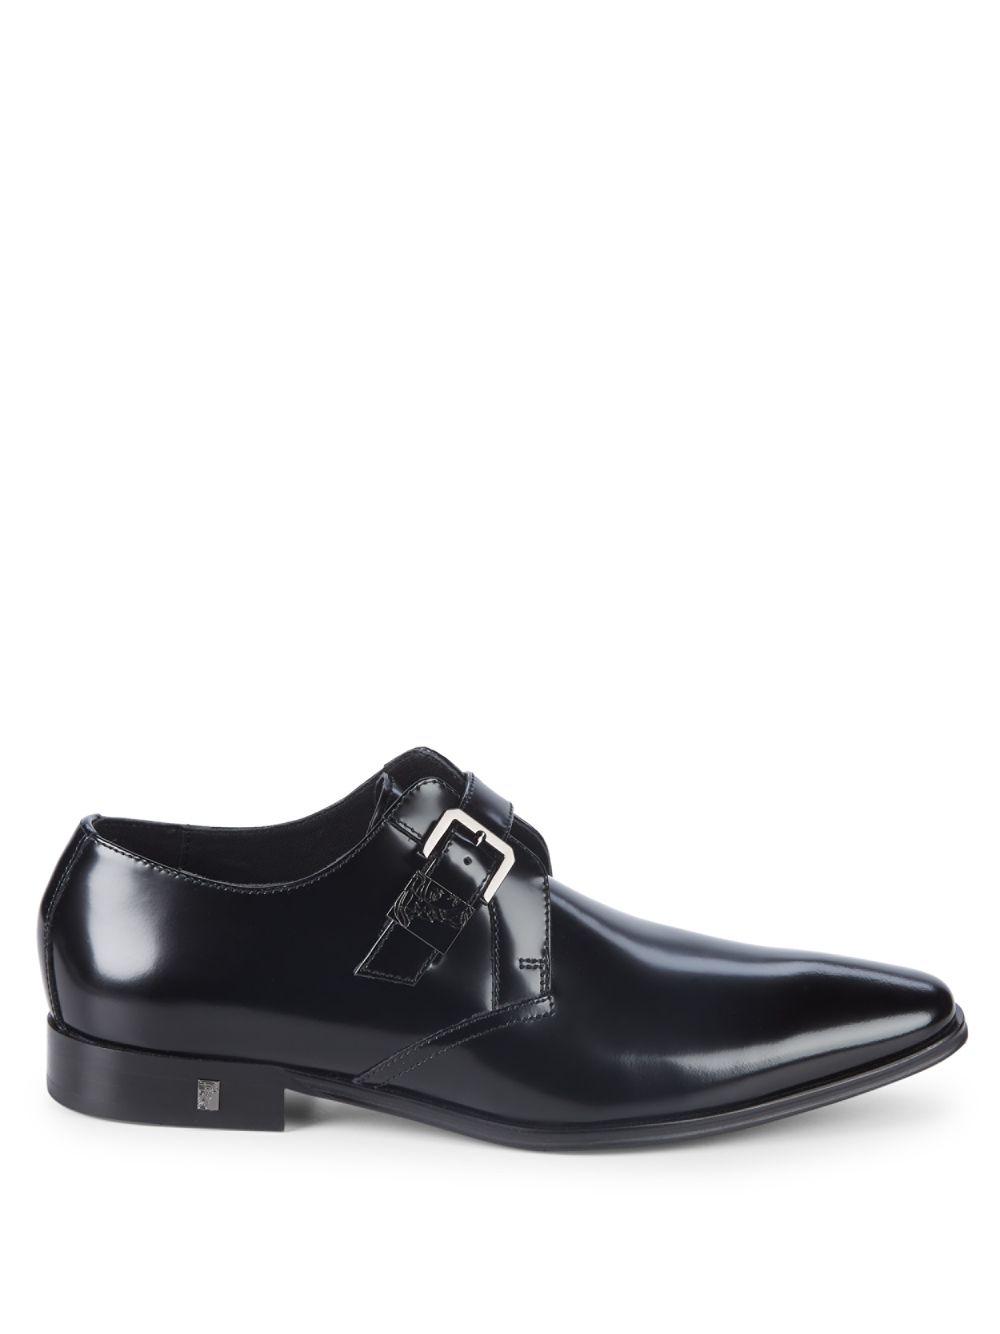 Versace Patent Leather Monk Strap Shoes in Black for Men - Lyst